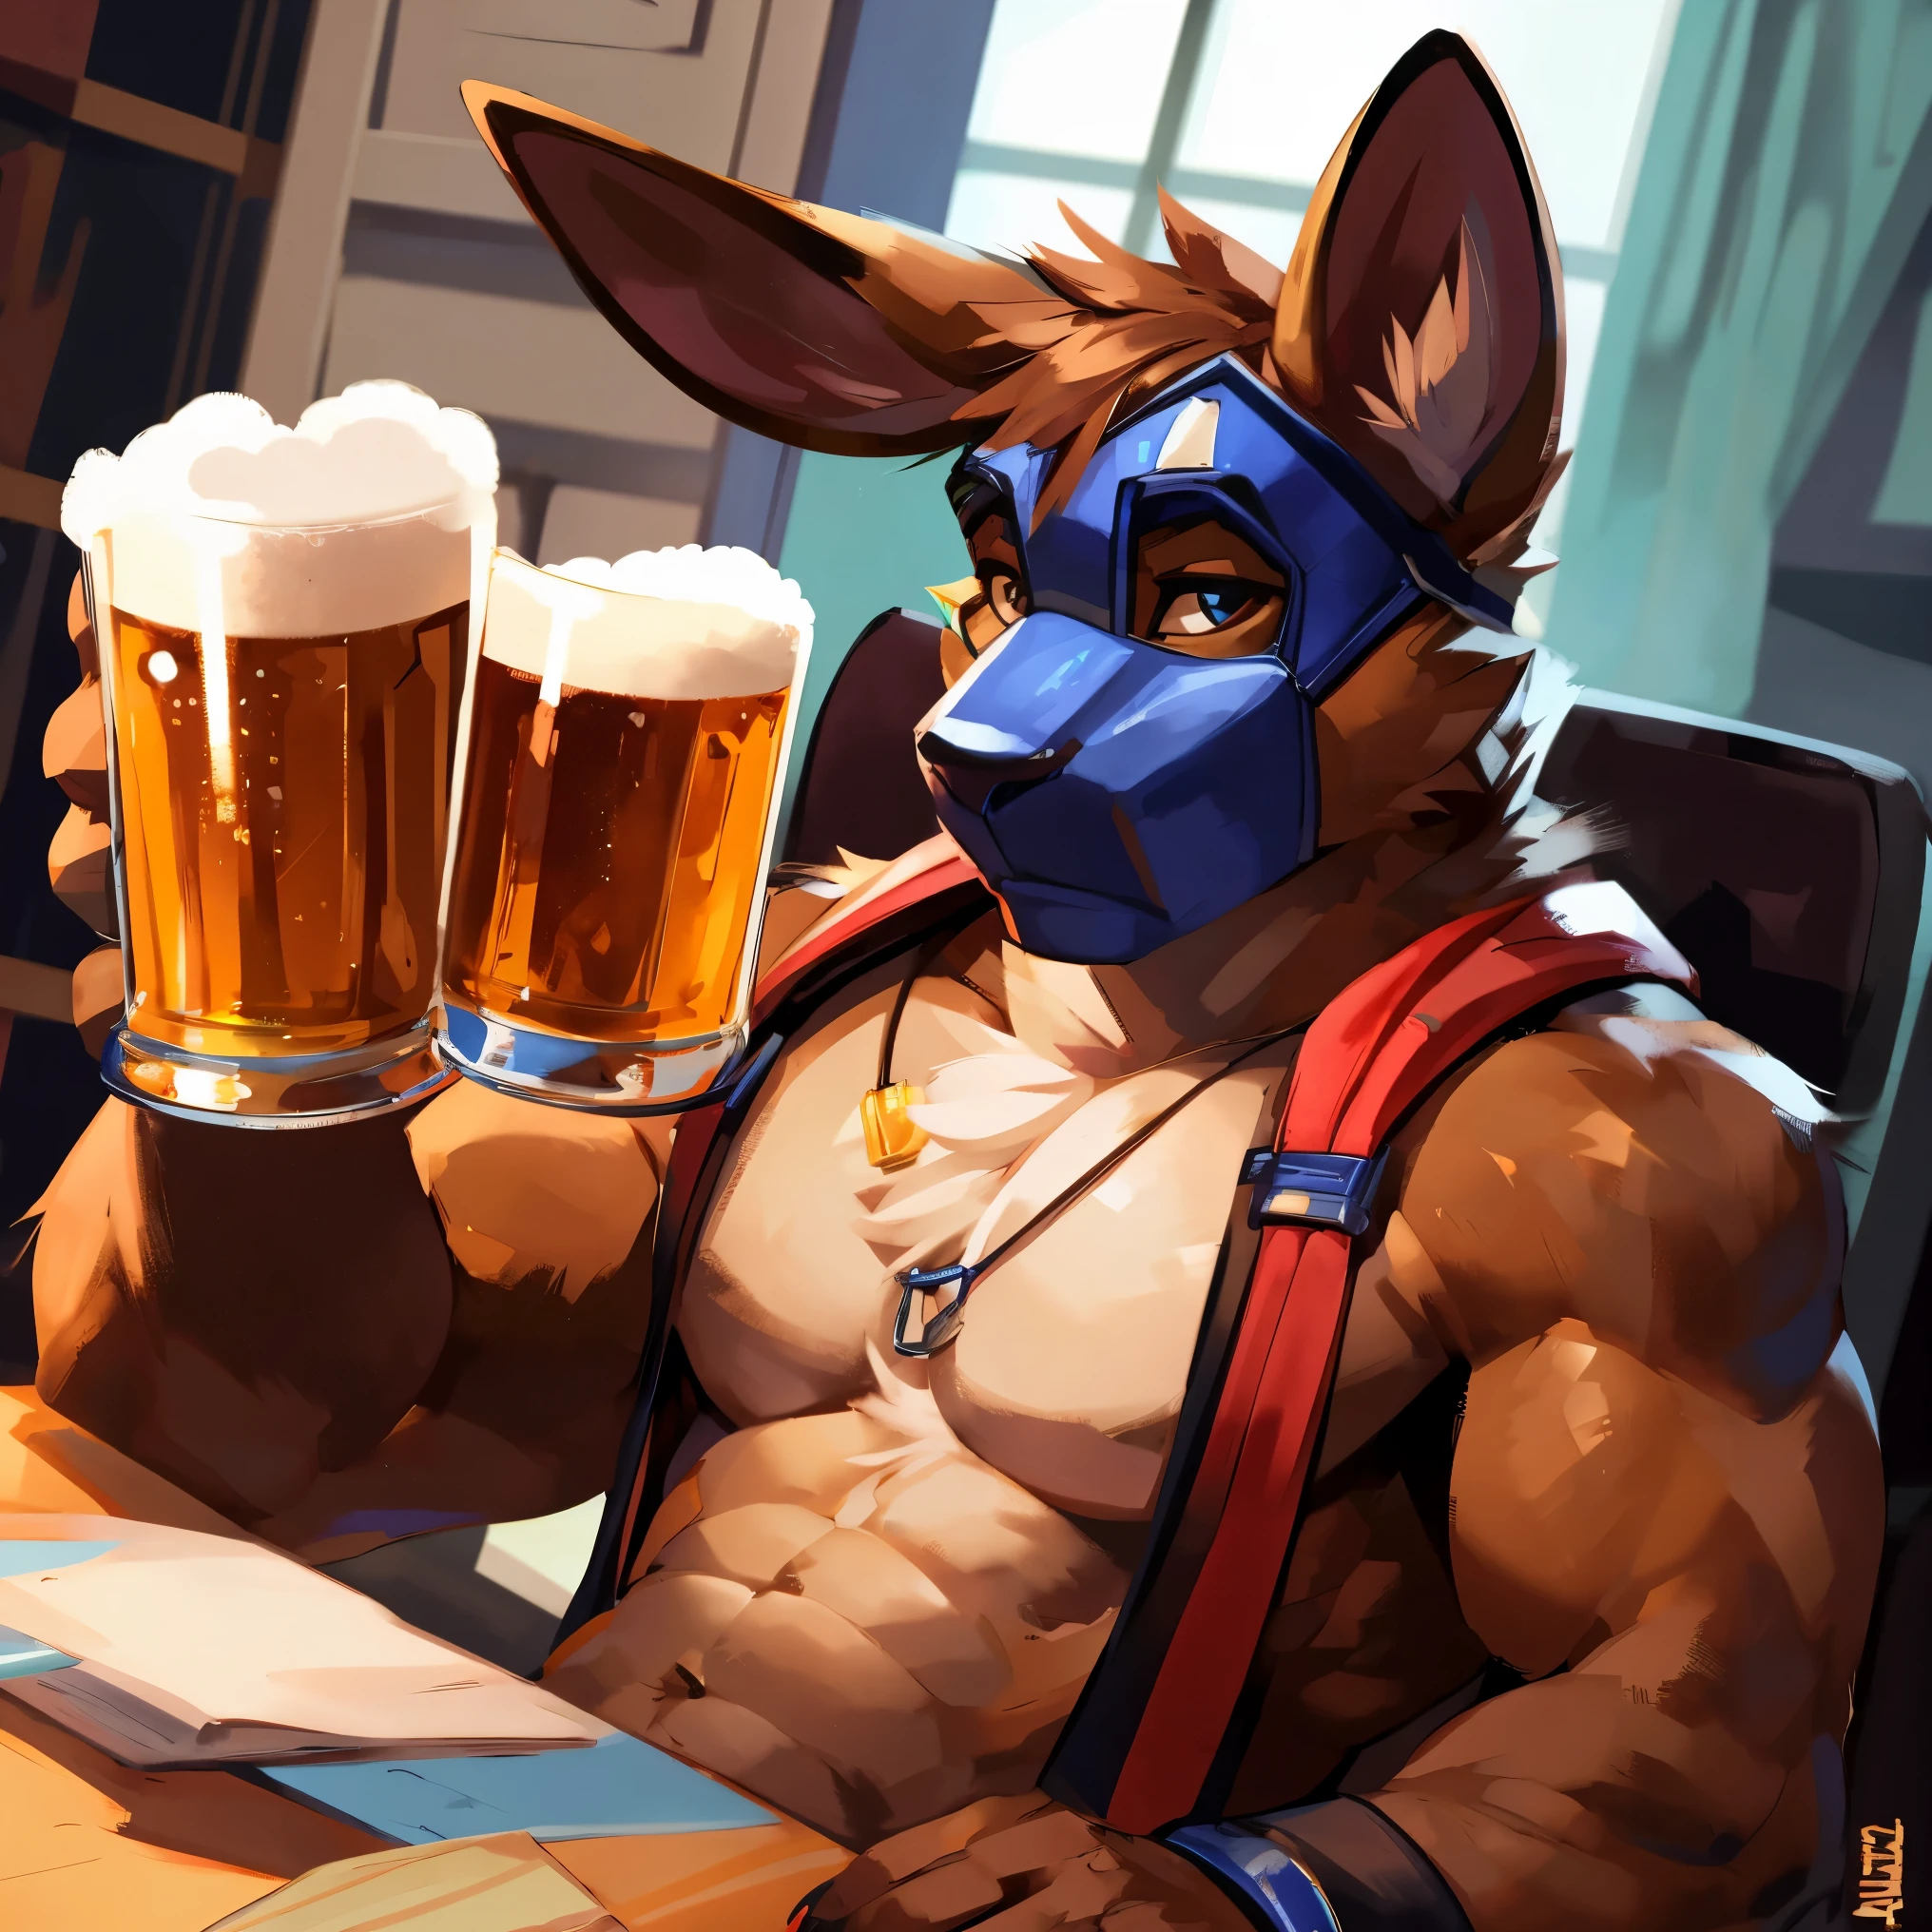 there is a man with a bunny mask on holding a beer, (sfw) safe for work, pov furry art, commission for high res, furry art, furry art!!!, anthro art, fursona furry art commission, sfw version, furry body, fursona art, anthro paw pov art, furry brown body, furry fantasy art, furry chest, By mystikfox61